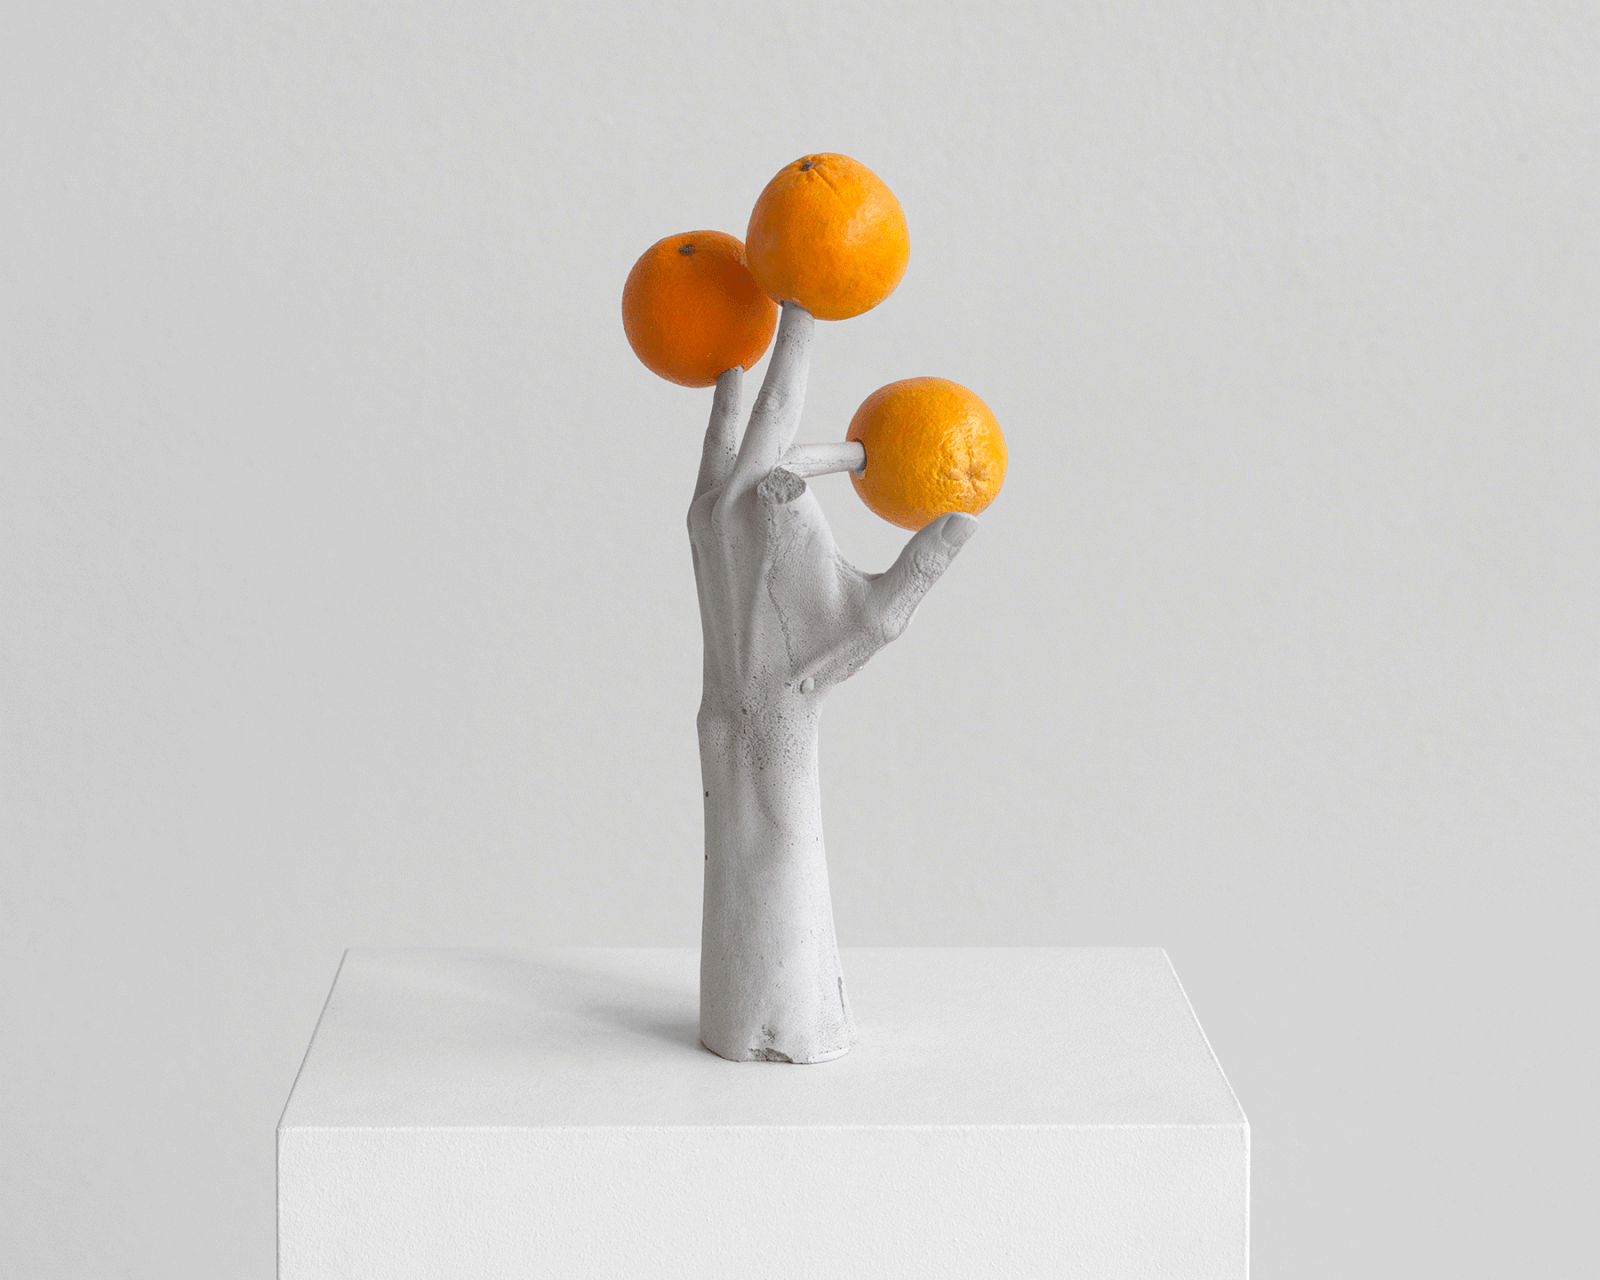 ERWIN WURM, One Minute forever (hands/fruits), 2019